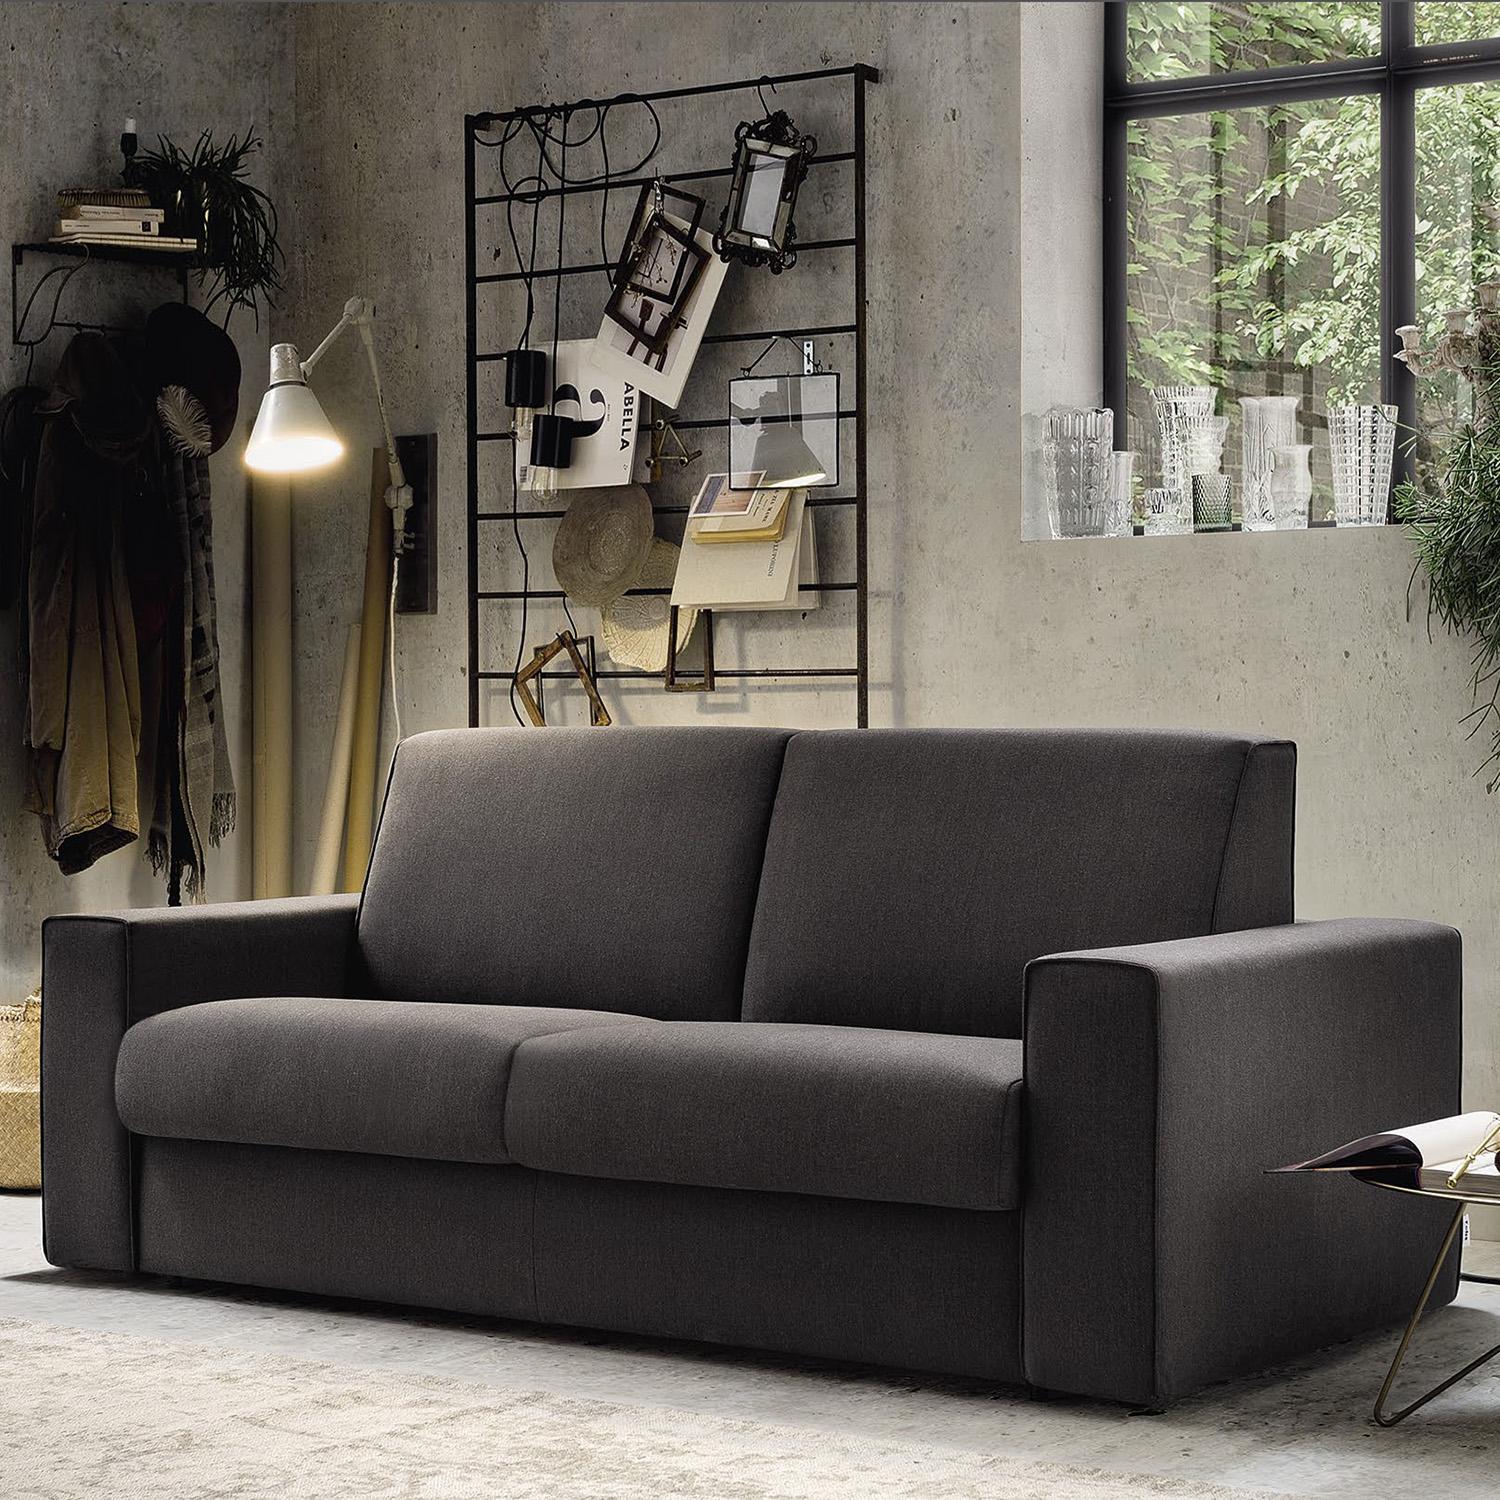 Roulette Loft modern sofa bed with chaise longue | DIOTTI.COM